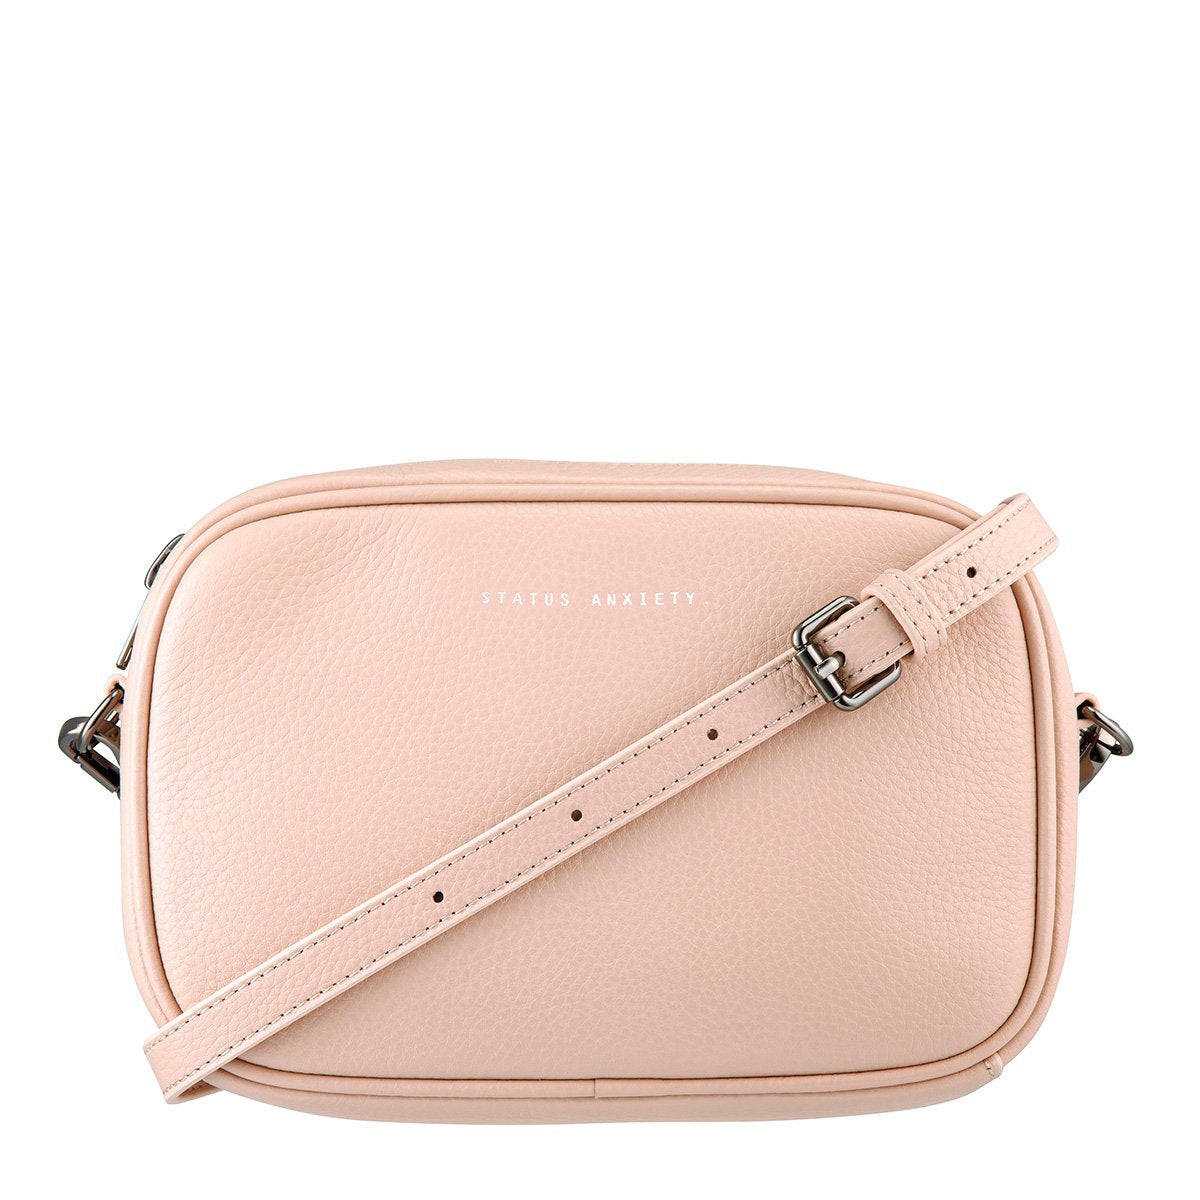 Status Anxiety Plunder Bag [COLOUR:DUSTY PINK]